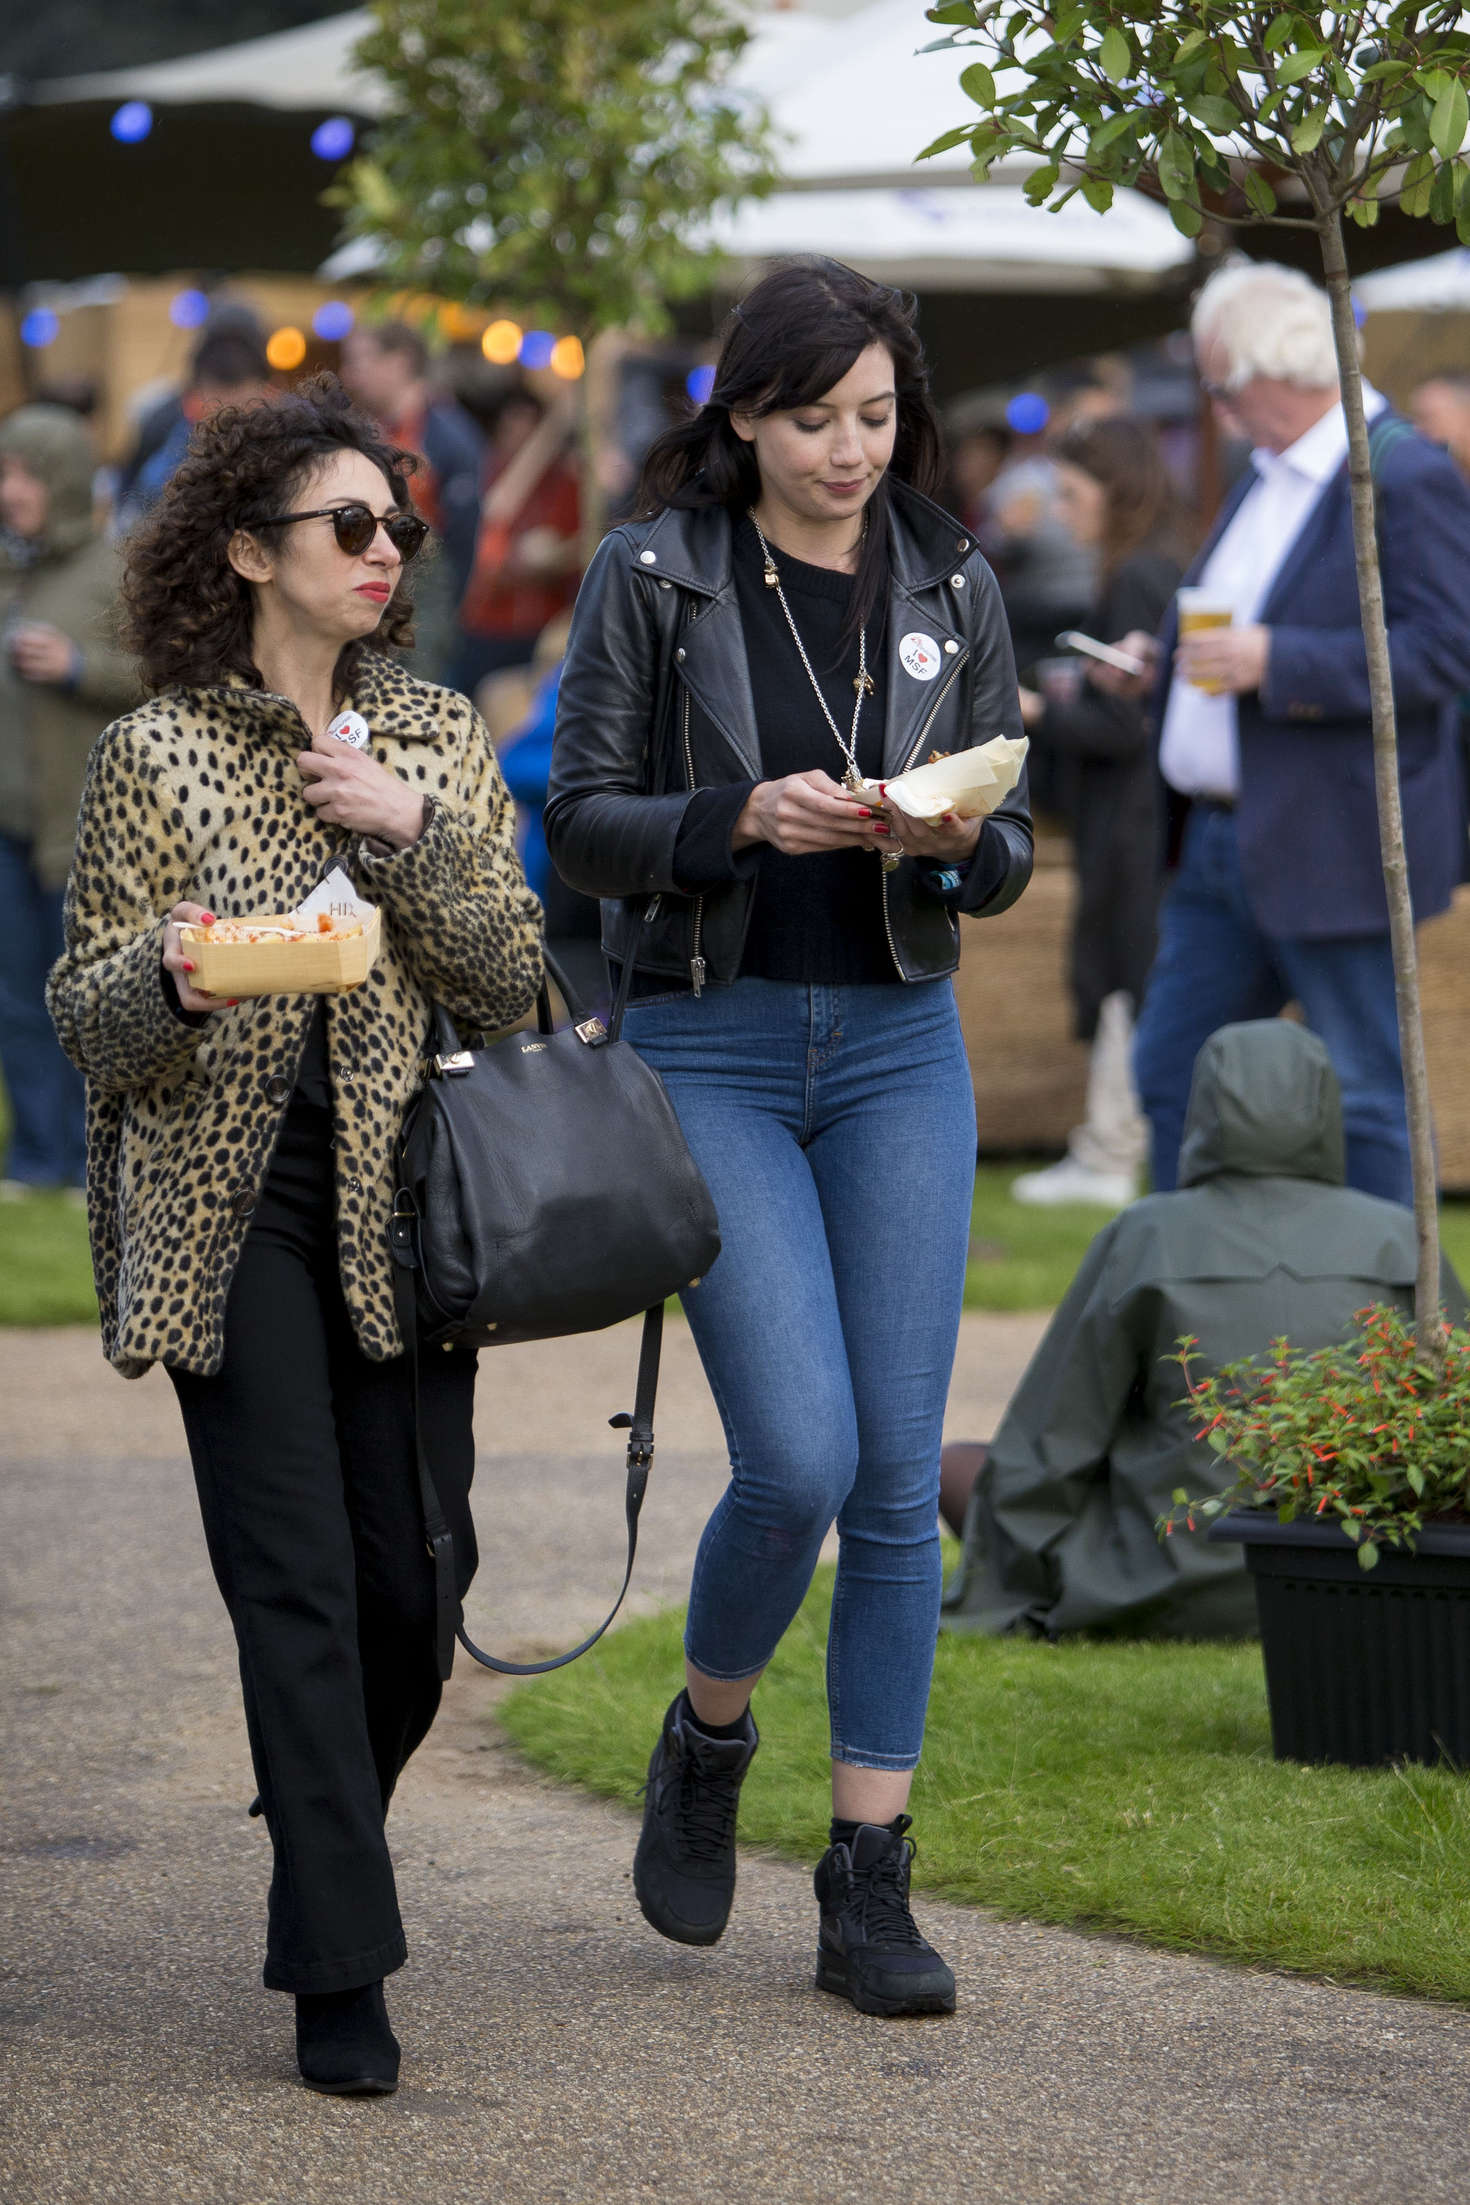 Daisy Lowe attends British Summer Time Festival